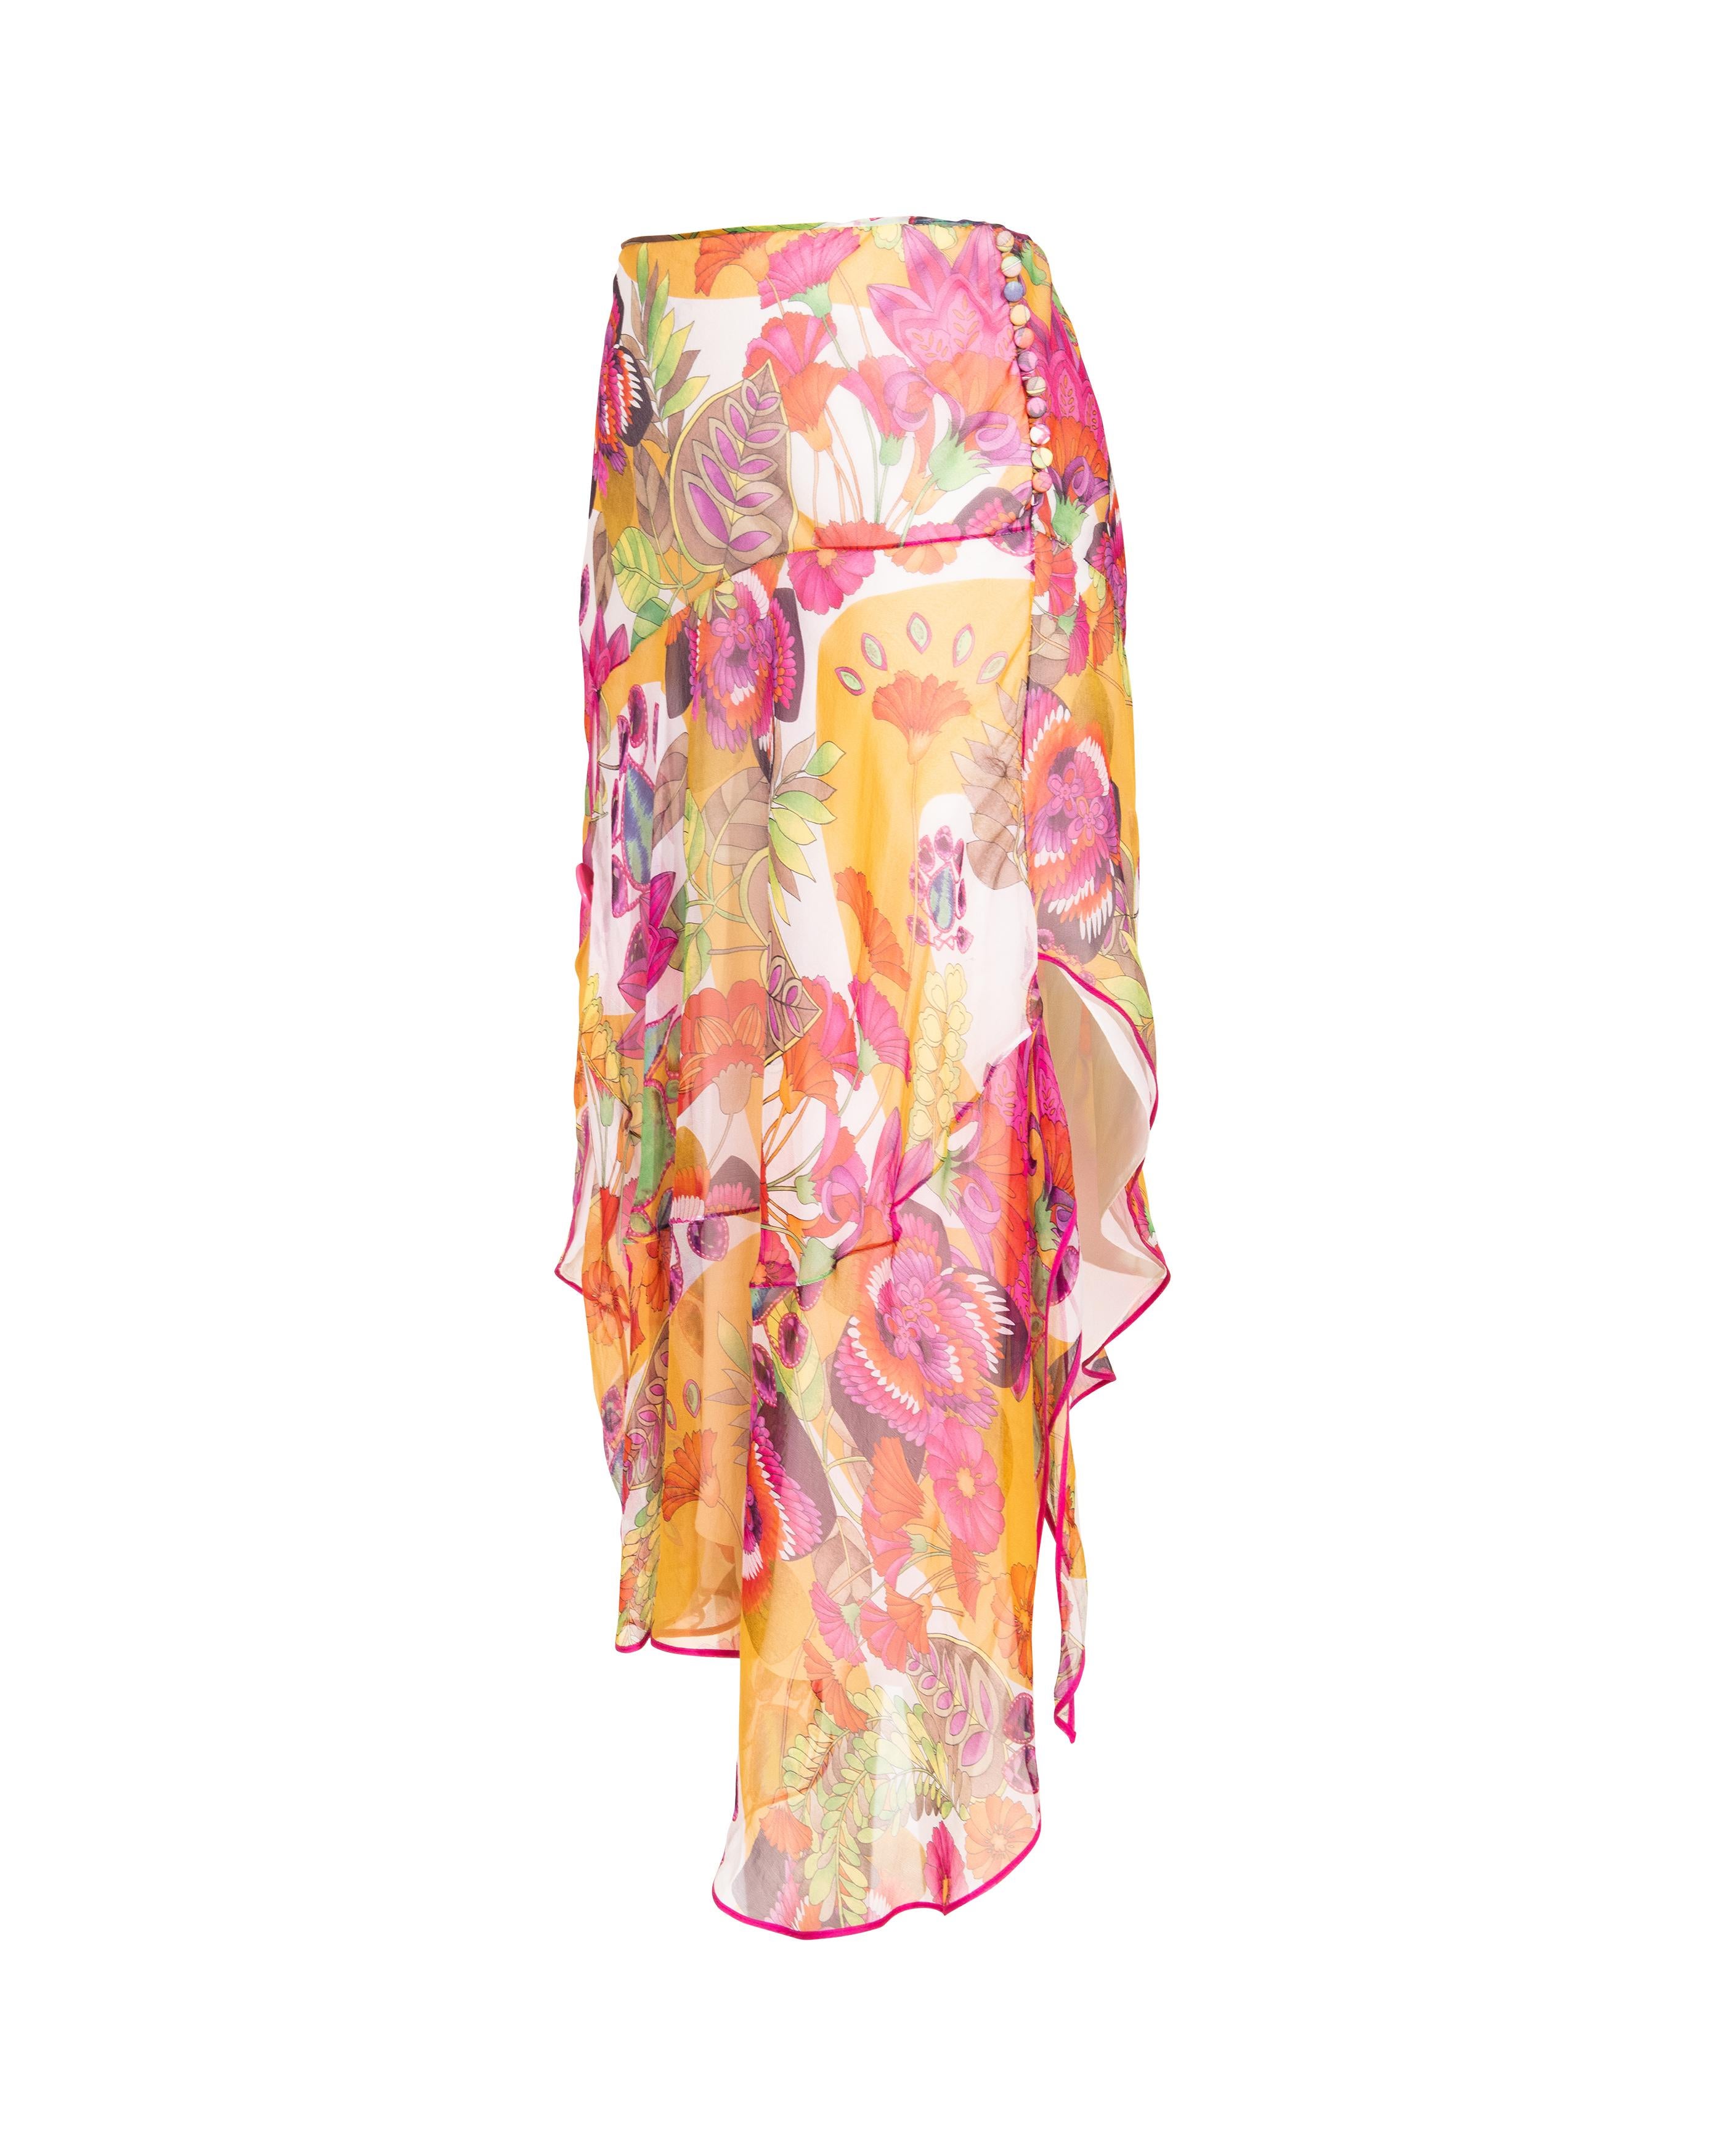 S/S 2005 Christian Dior by John Galliano Floral Print Asymmetrical Silk Skirt In Good Condition In North Hollywood, CA